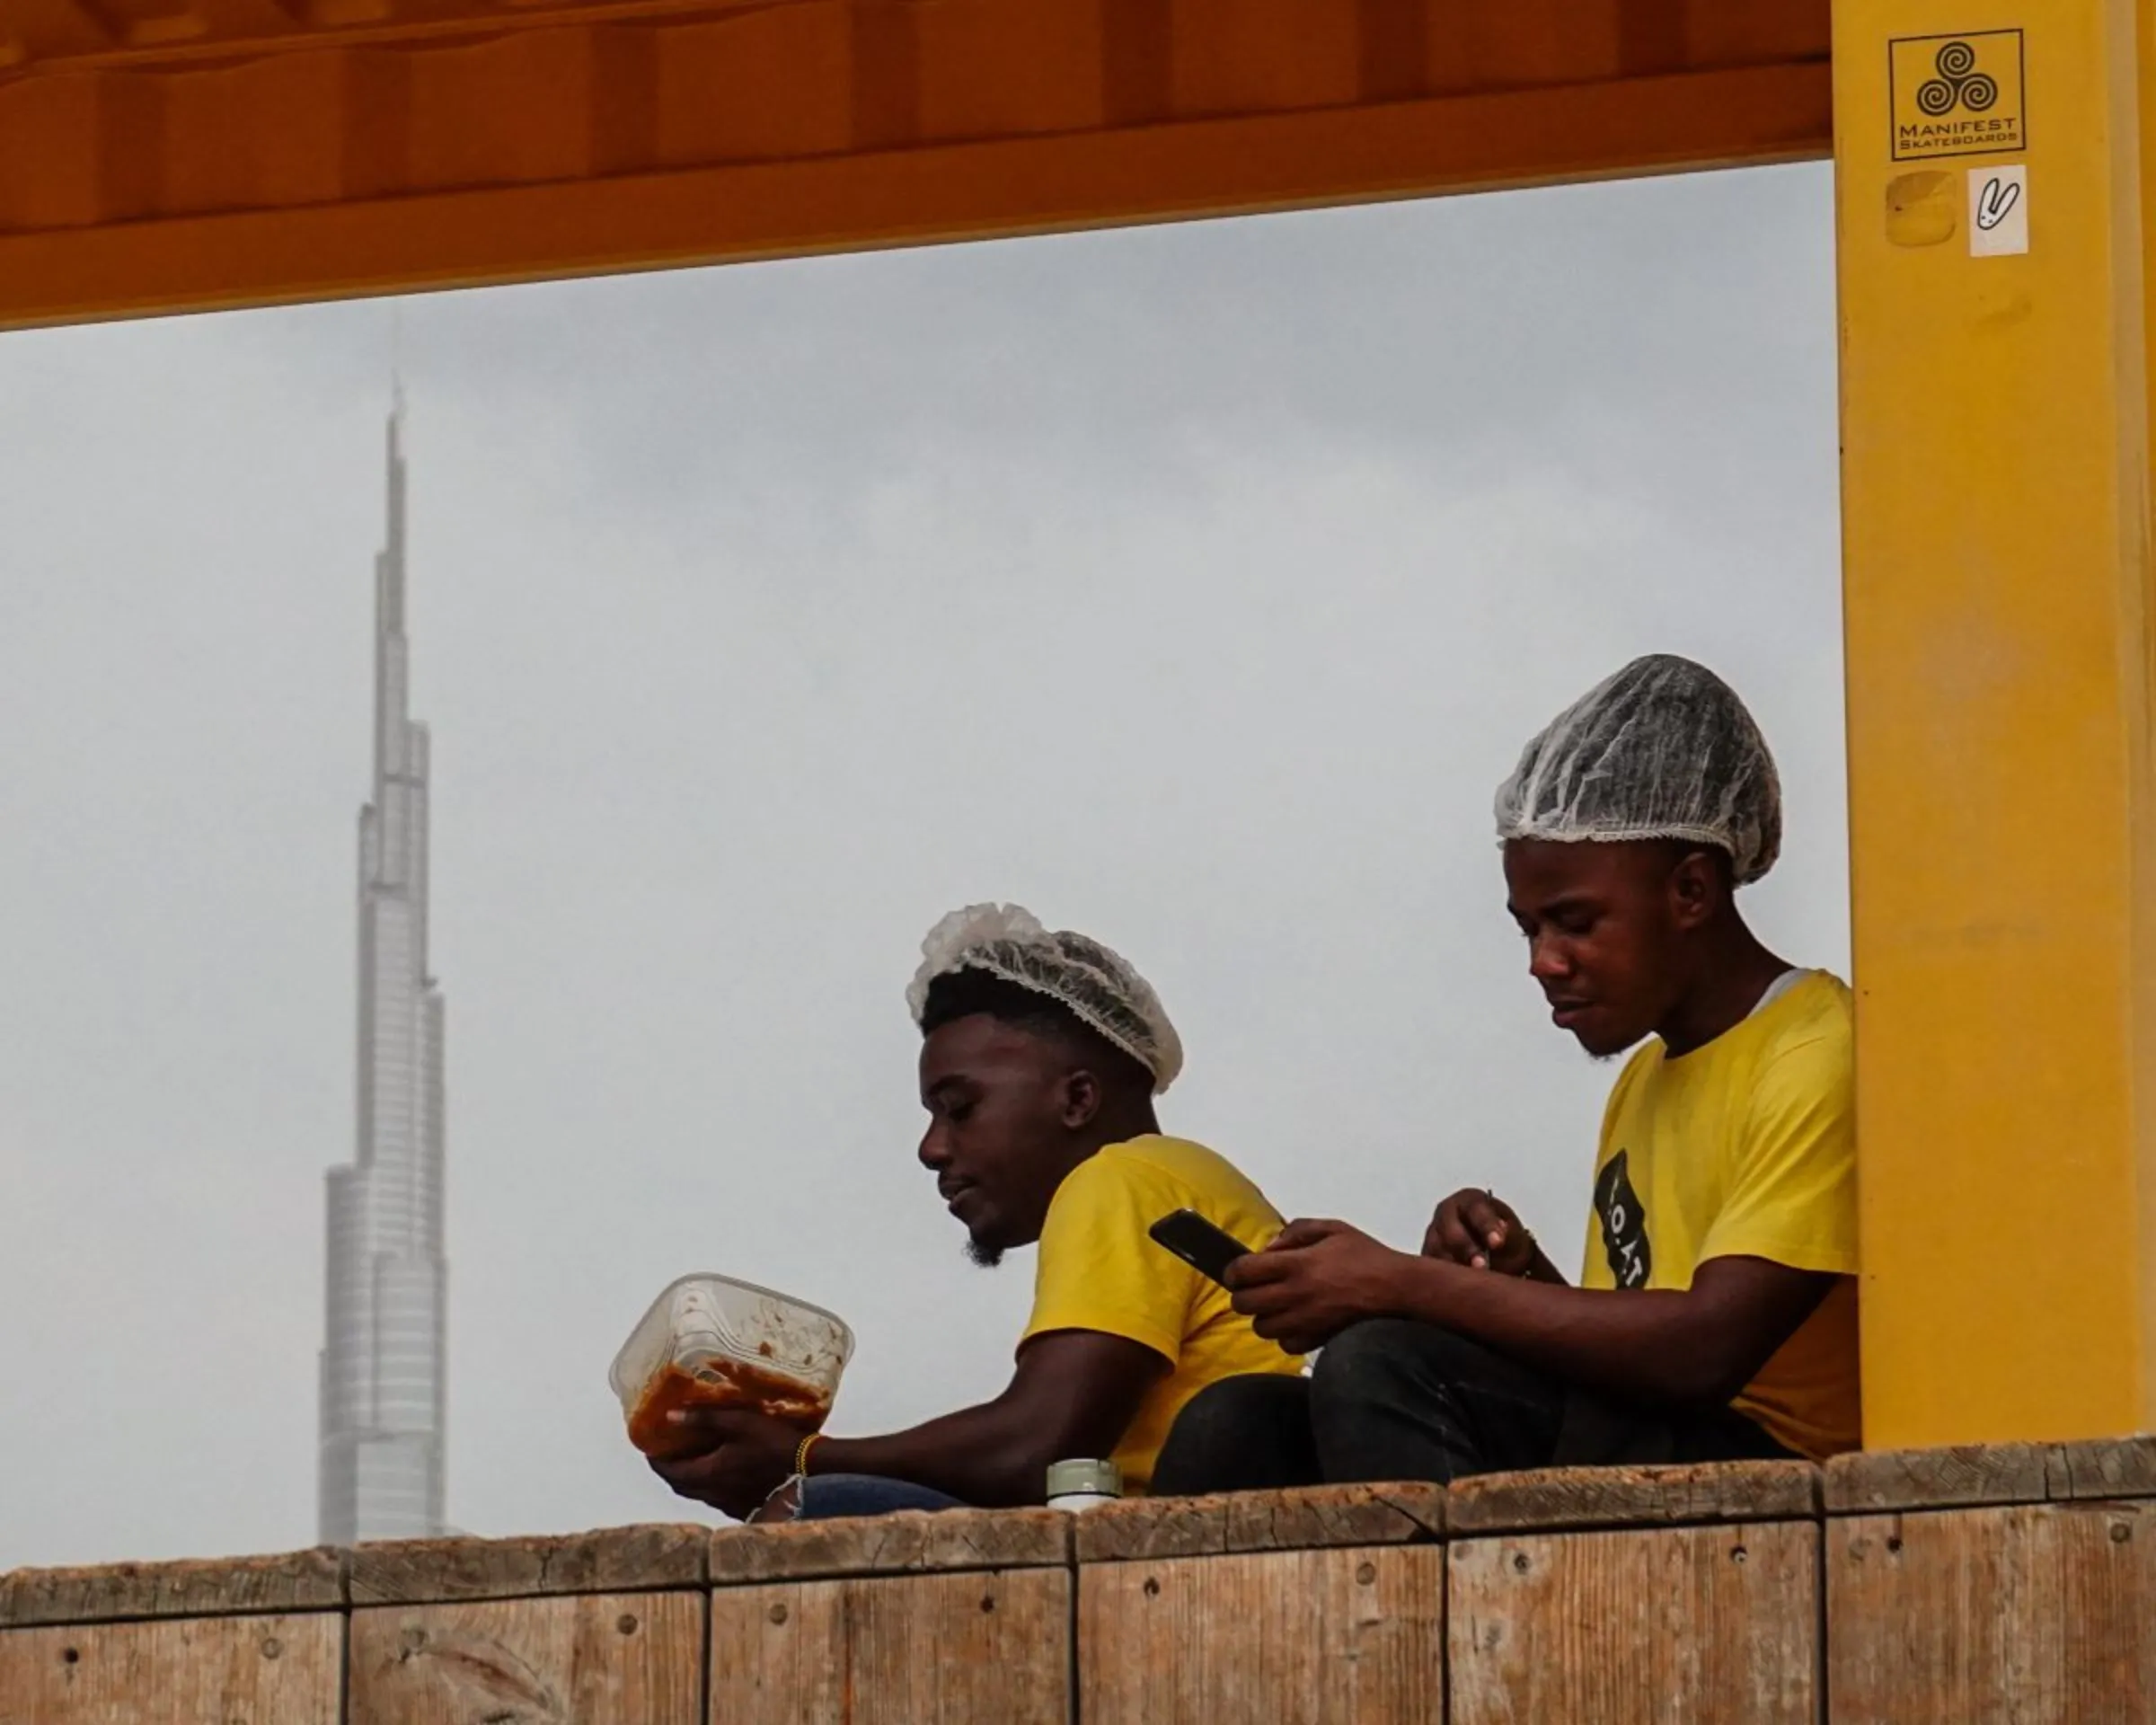 Two workers have a meal while resting with the Burj Khalifa tower seen in the background in Dubai, United Arab Emirates, July 26, 2022